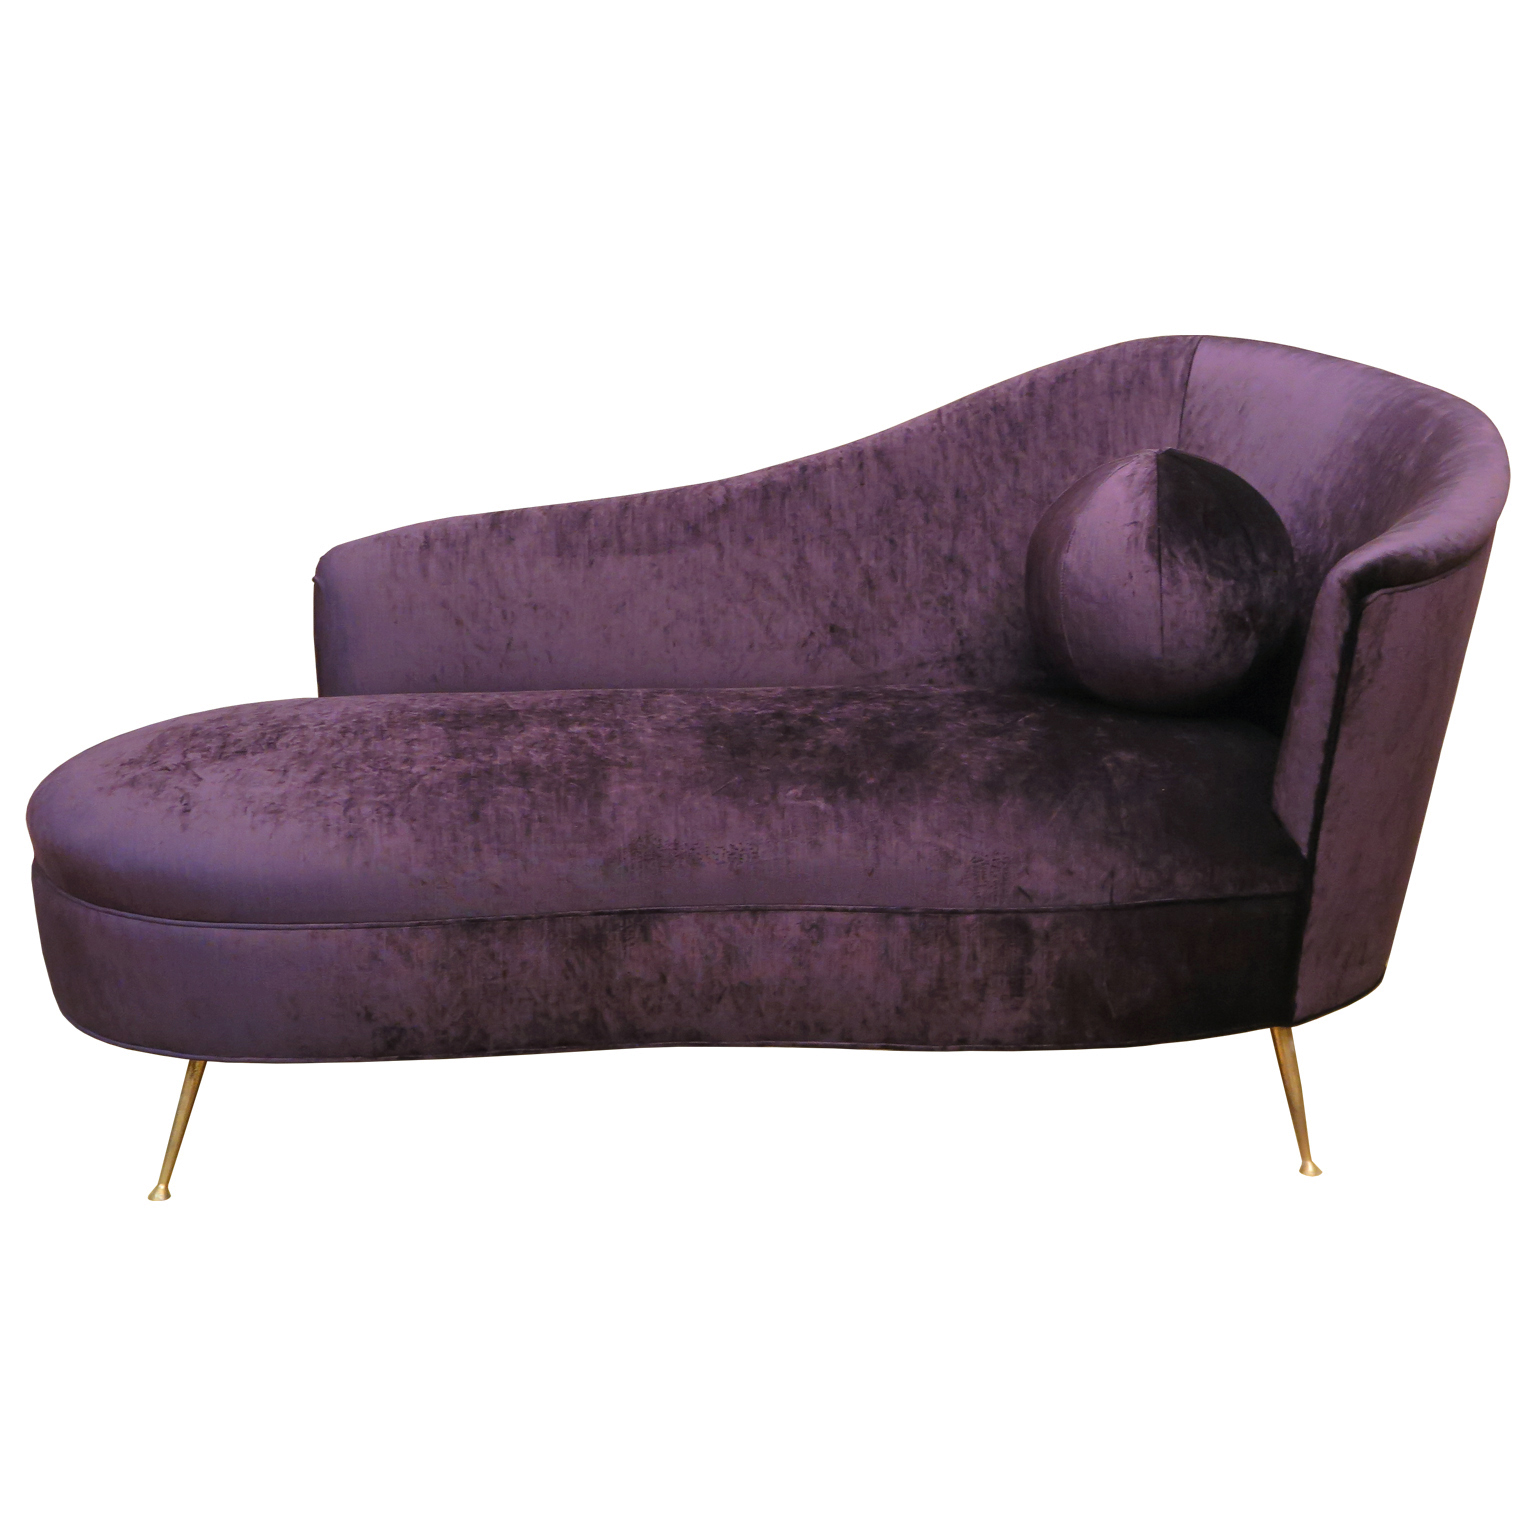 Mid-Century daybed with brass feet and newly upholstered in purple velvet.